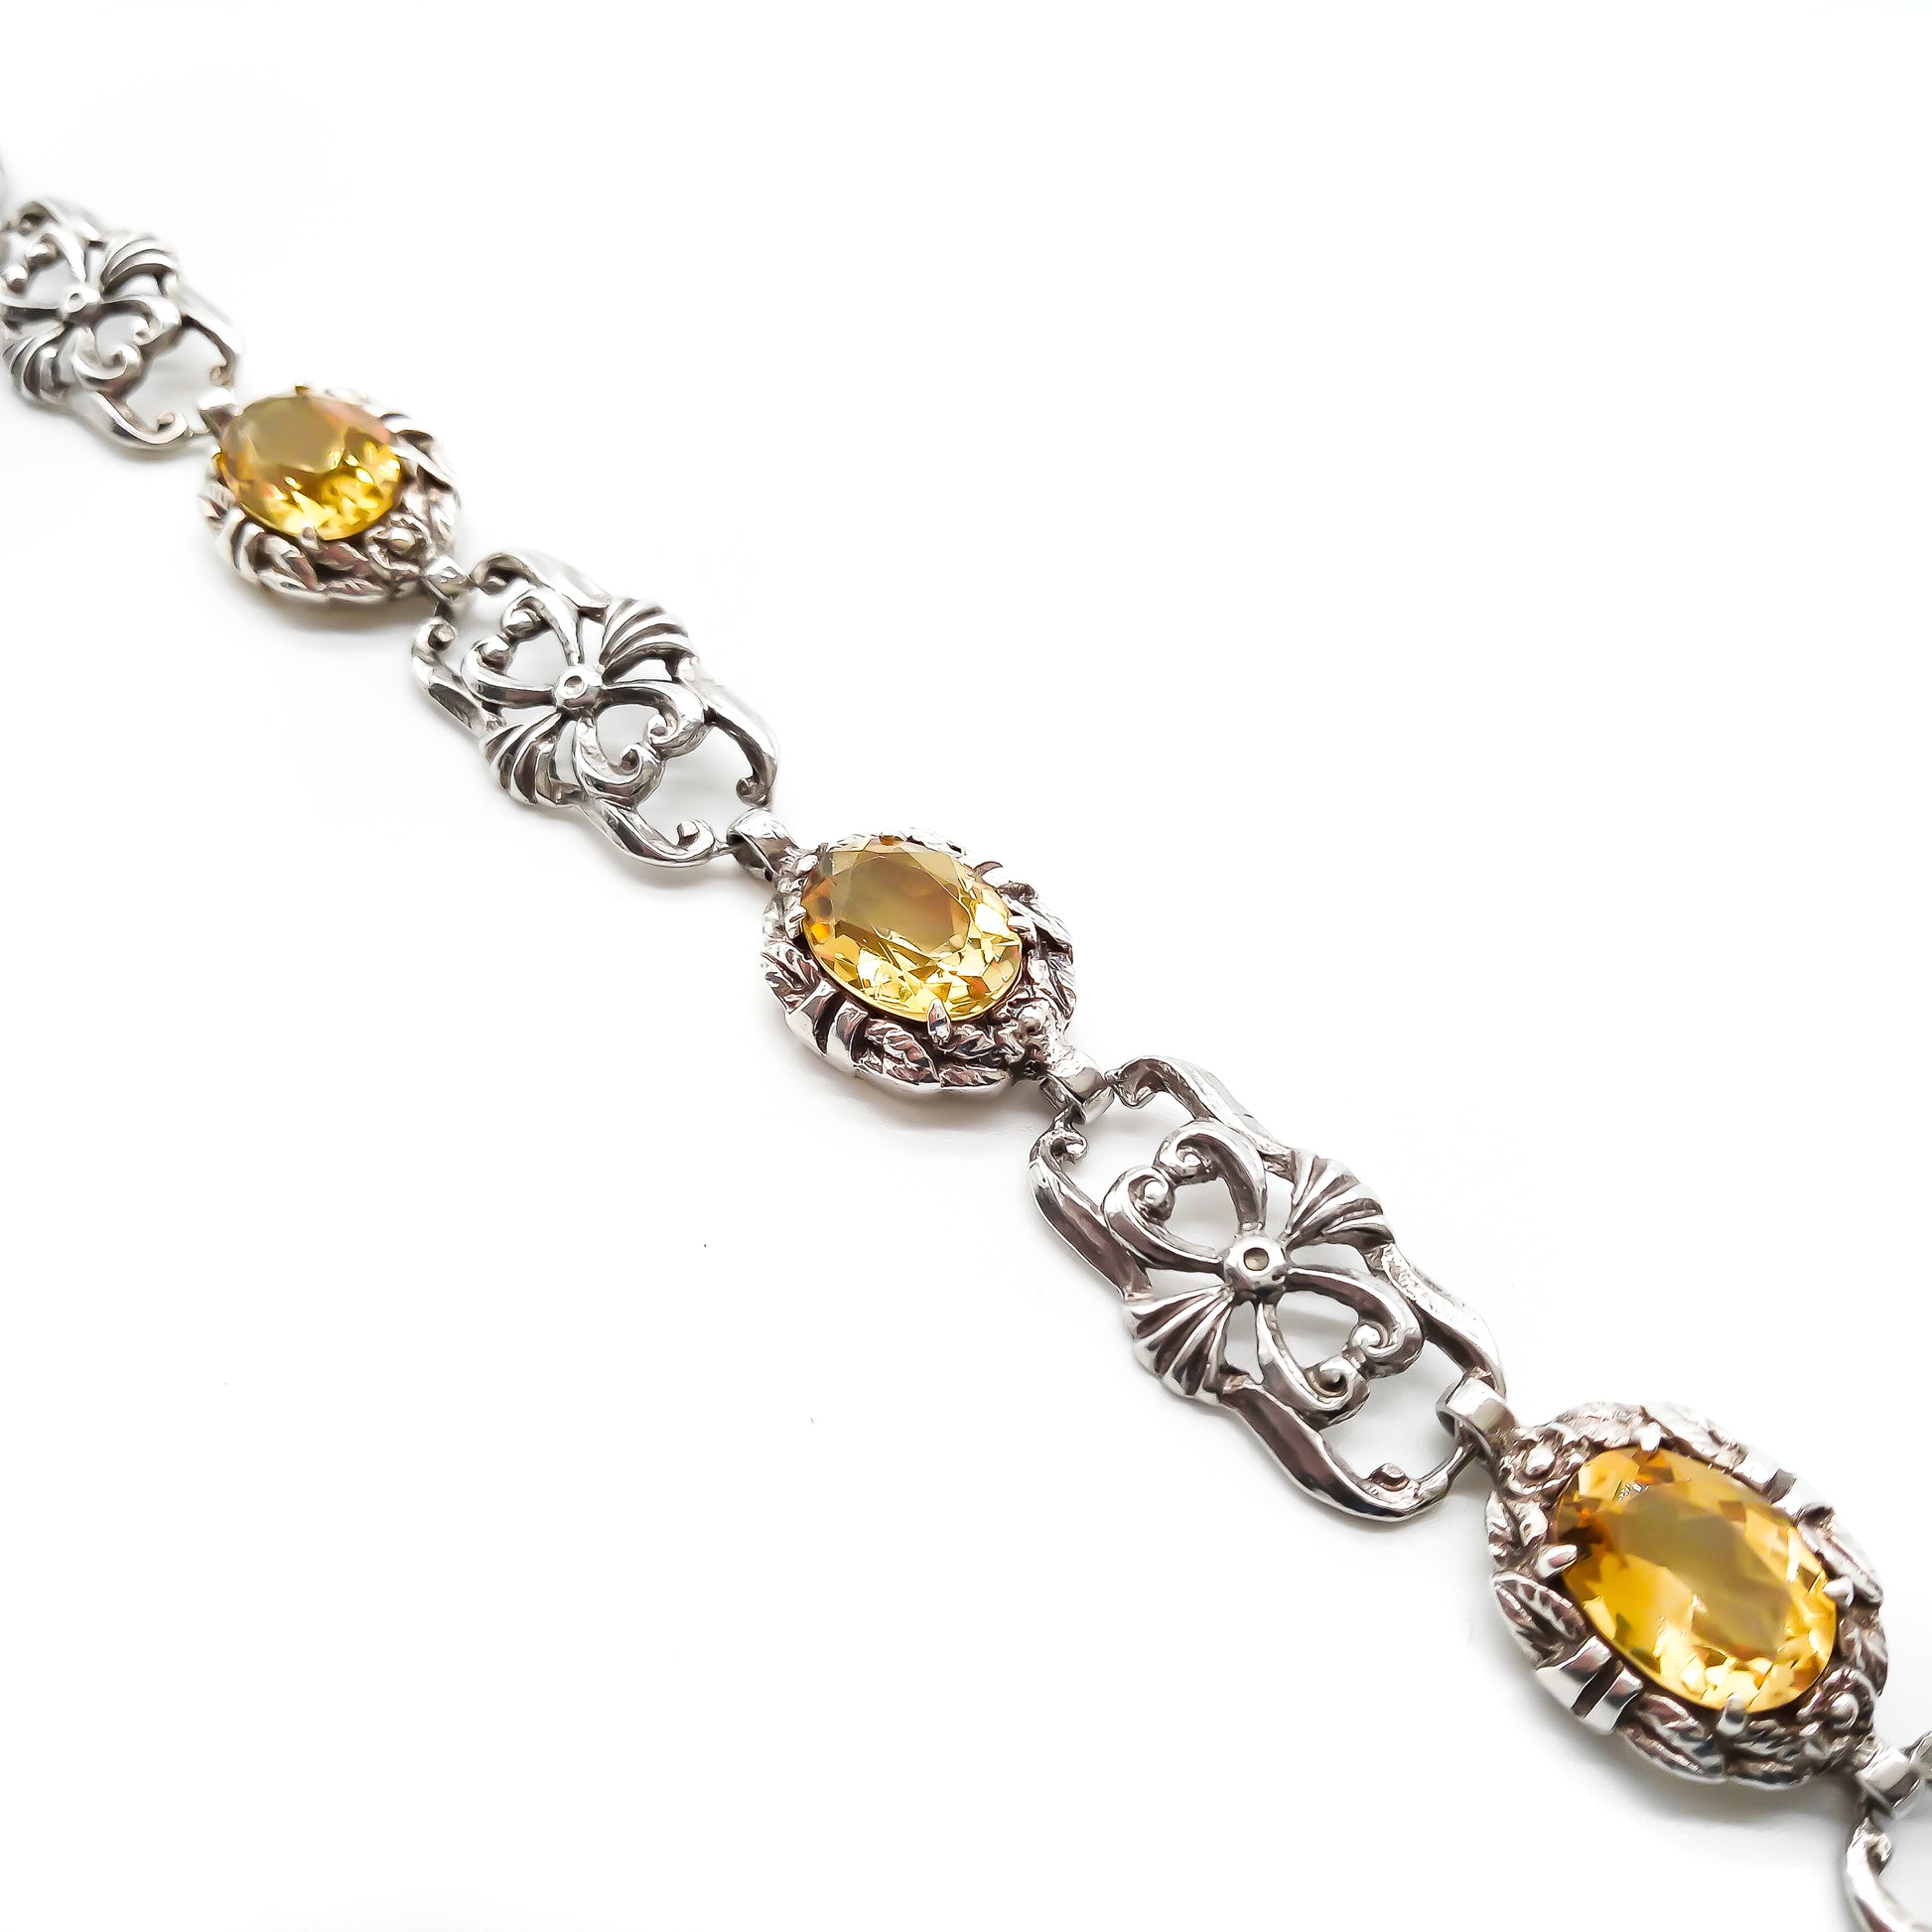 Stunning ornate sterling silver bracelet set with four beautifully faceted oval citrines.